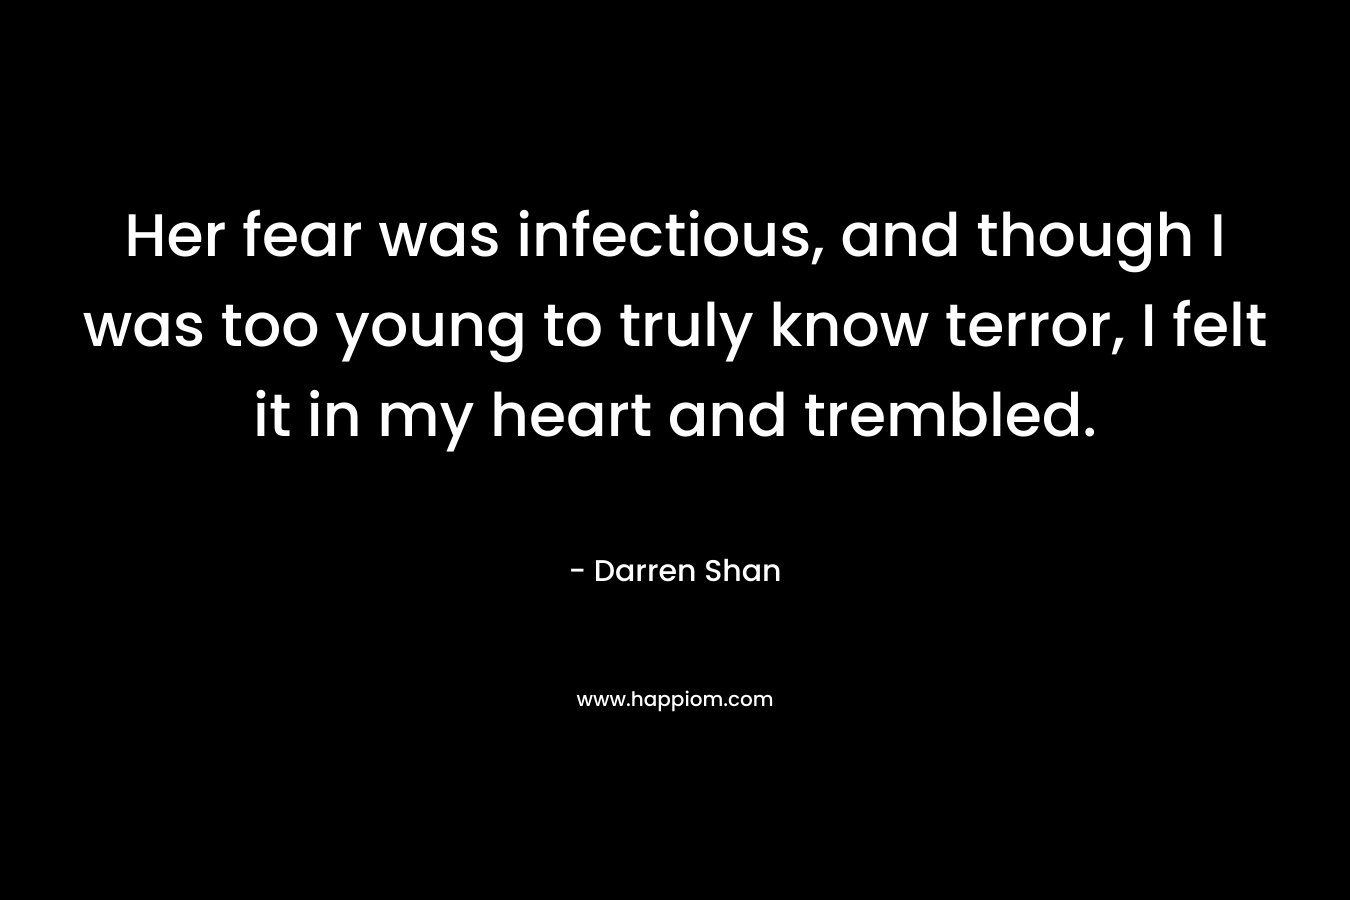 Her fear was infectious, and though I was too young to truly know terror, I felt it in my heart and trembled. – Darren Shan